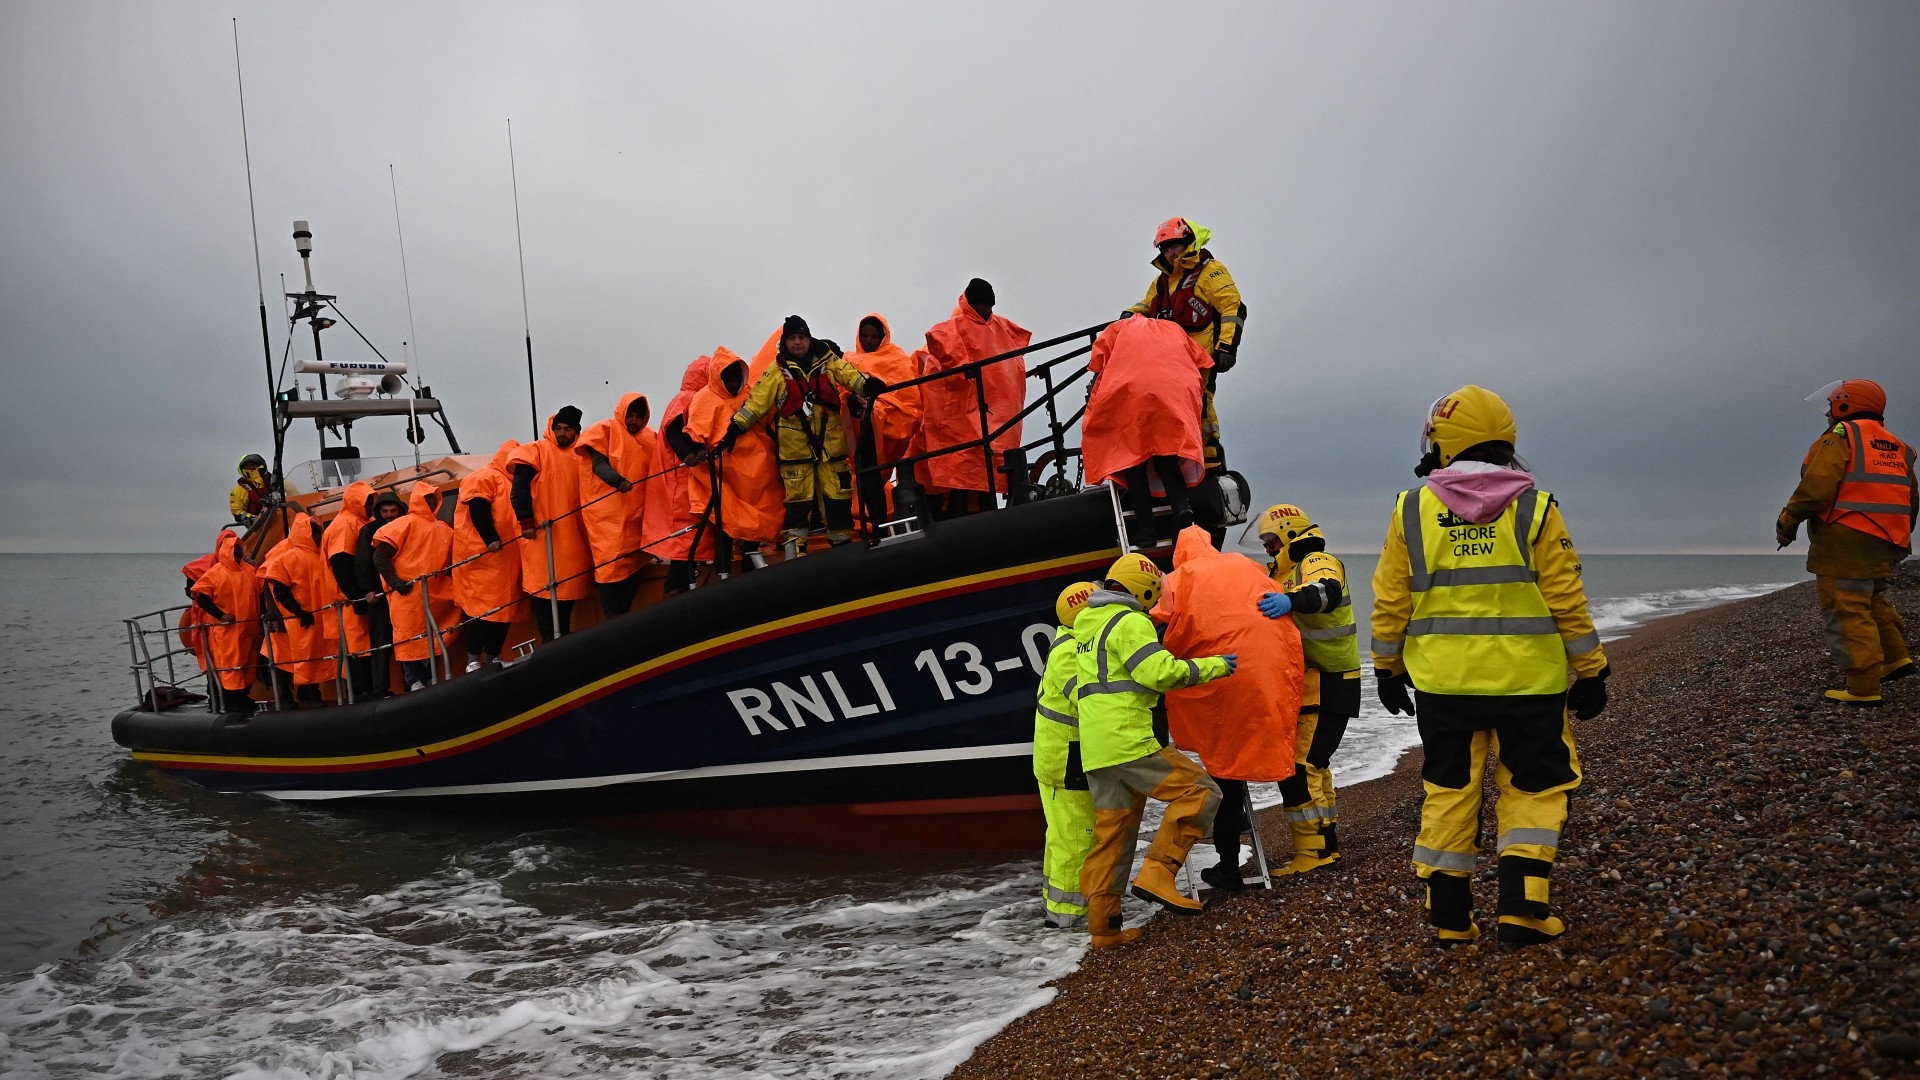 A Royal National Lifeboat Institution (RNLI) lifeboat at Dungeness on the southeast coast of England on 9 December 2022 (AFP/File photo)